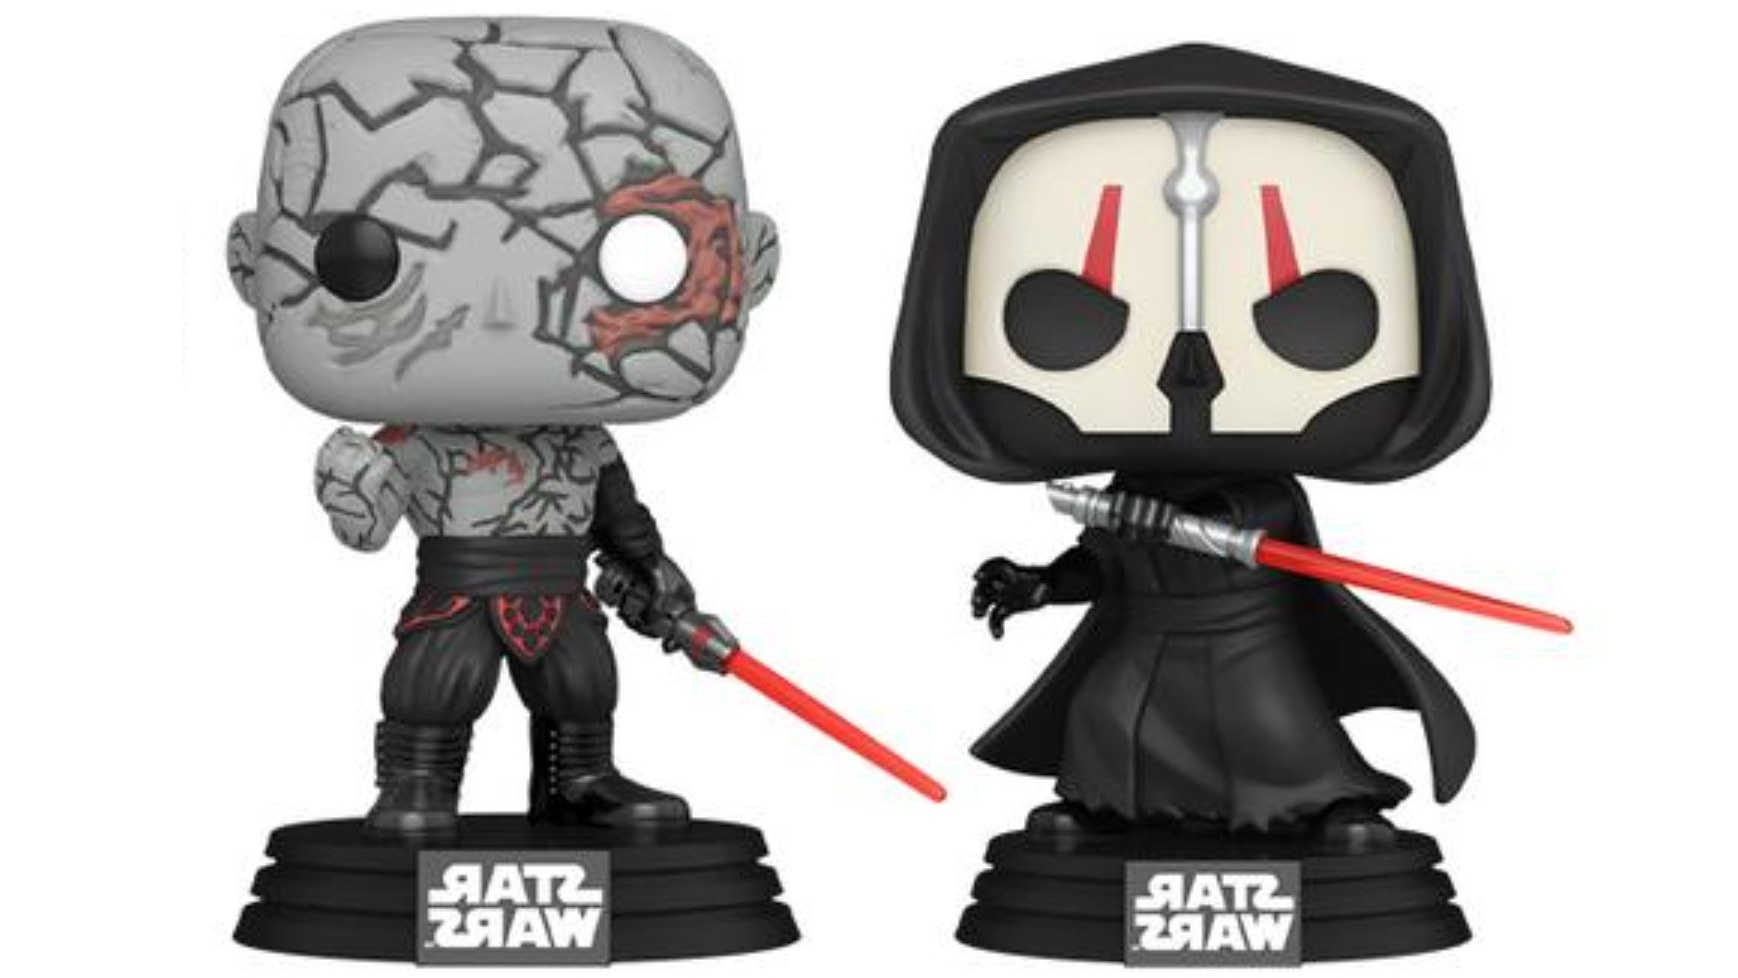 Nothing makes sense anymore: They're making Funko Pops out of the cult classic 2004 Obsidian RPG, Star Wars: Knights of the Old Republic 2: The Sith Lords